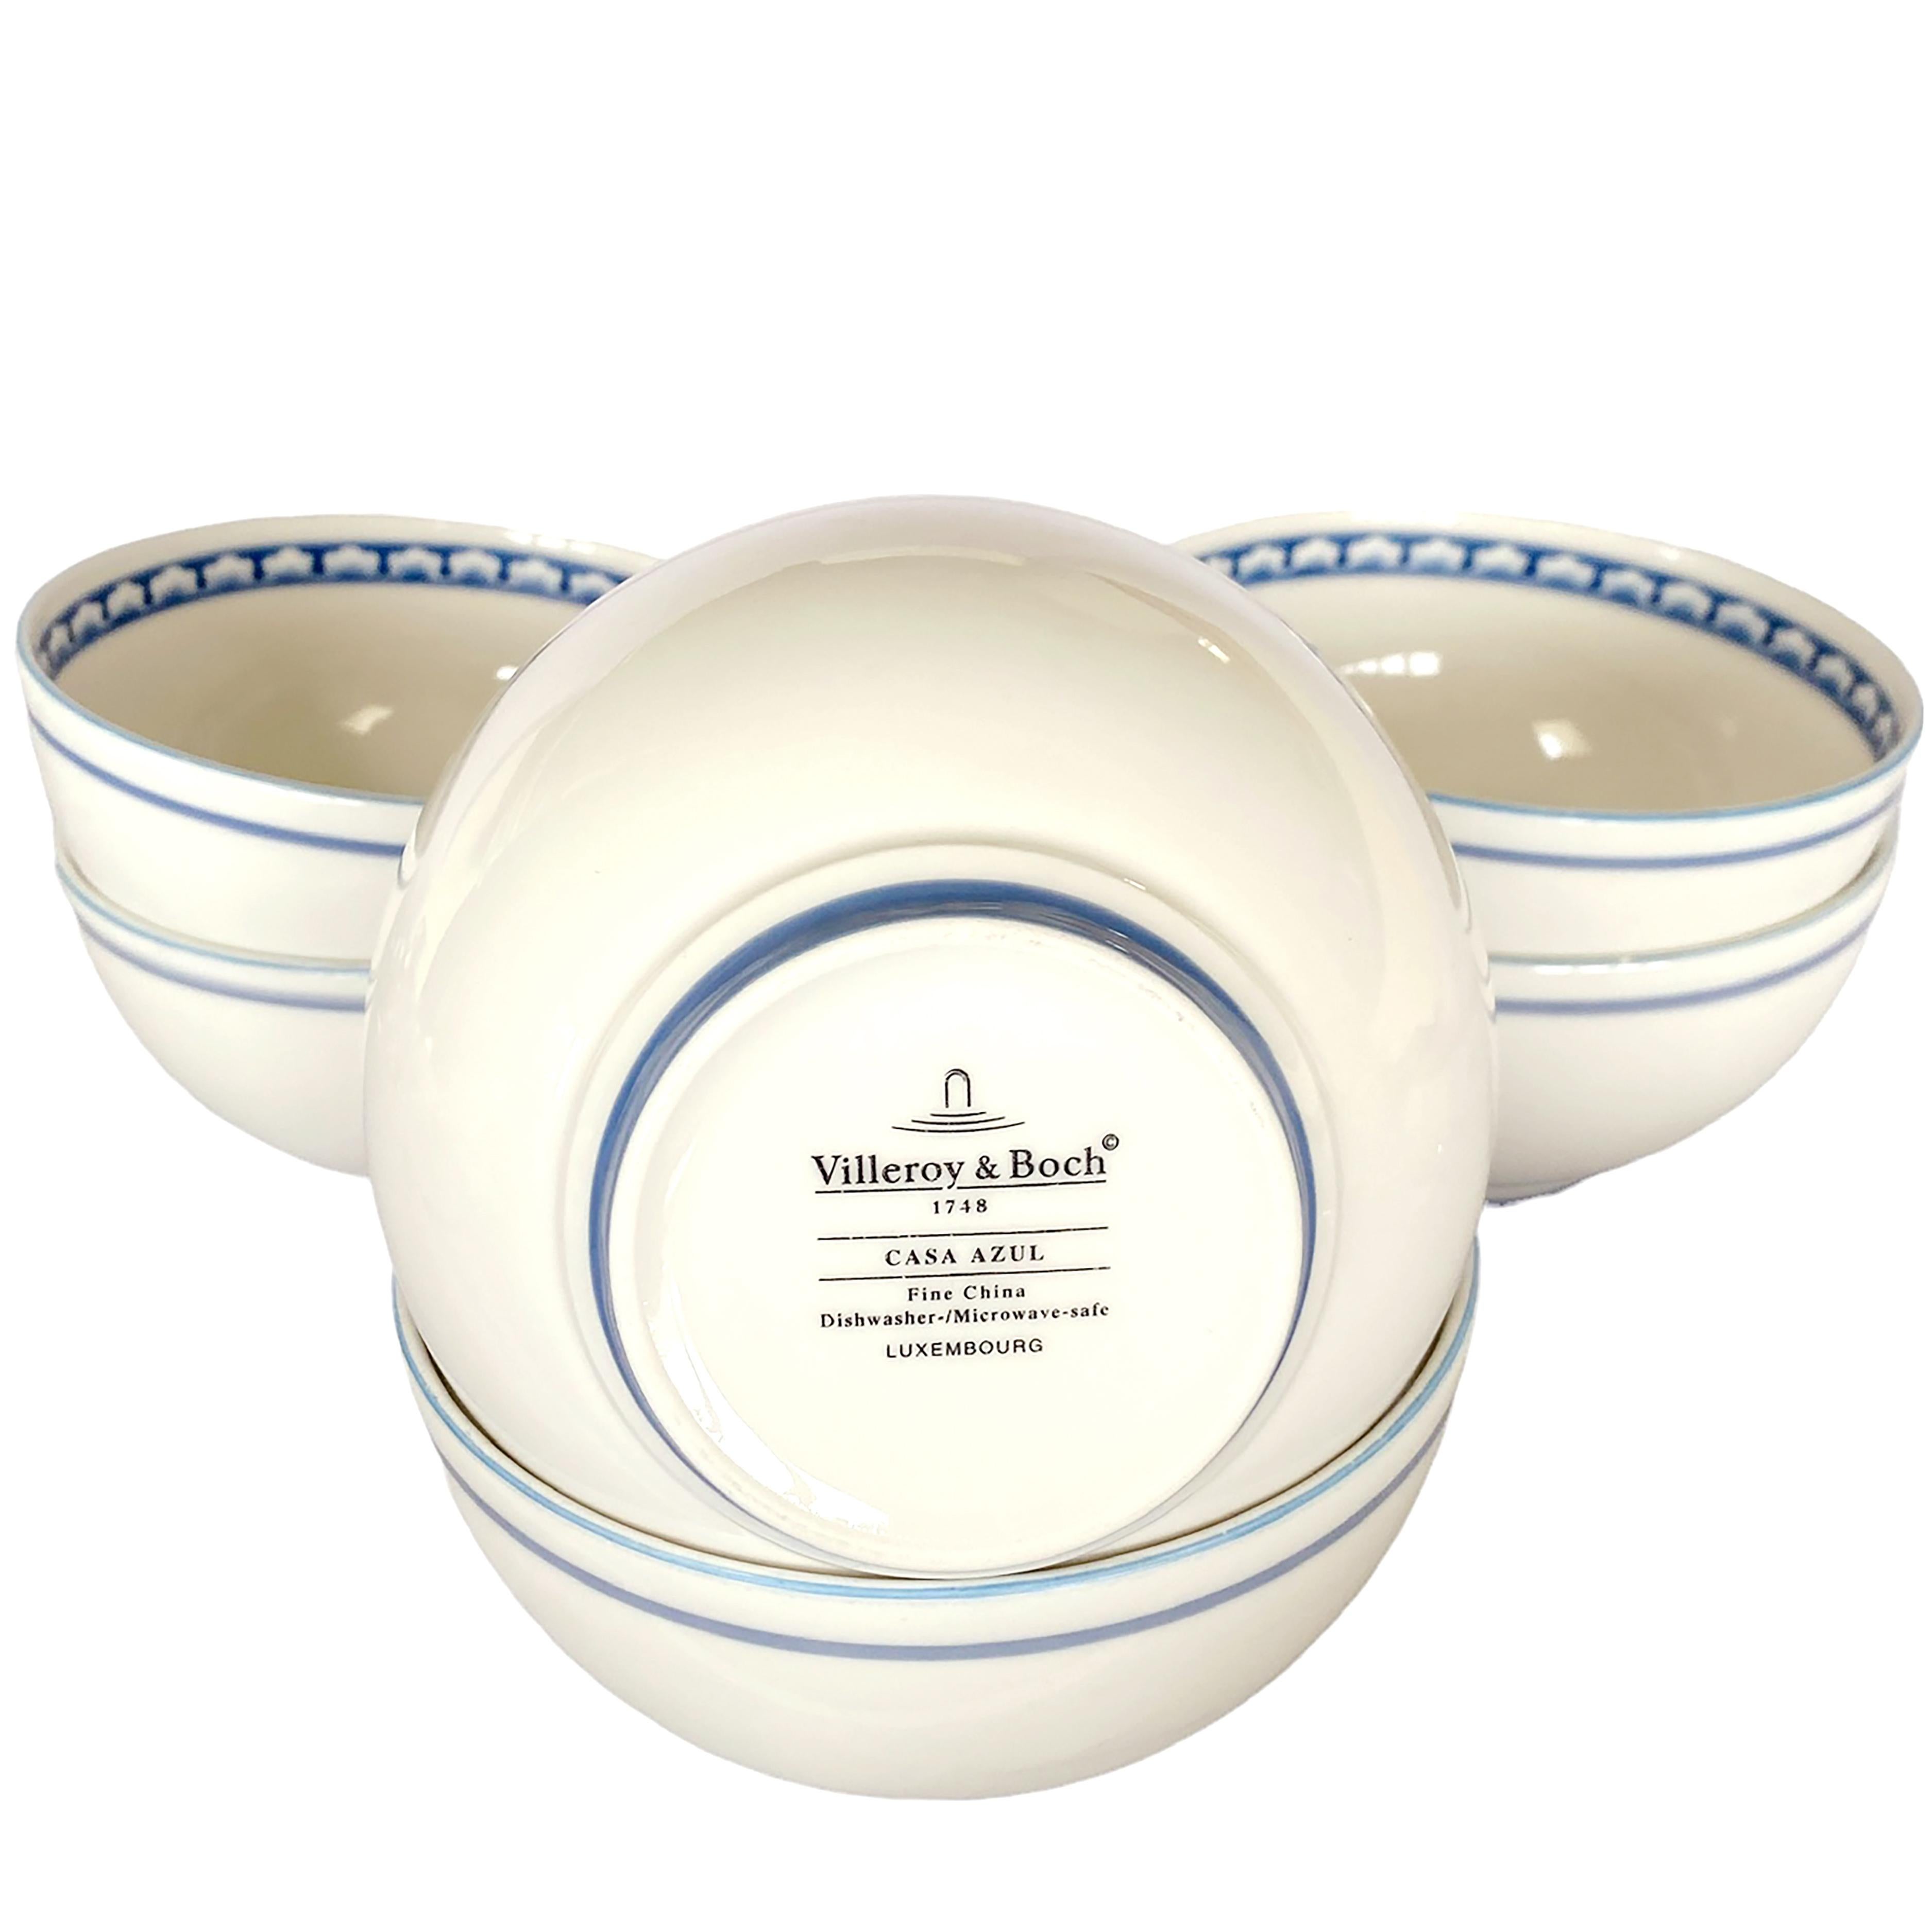 Set of 6 blue and light cream good size Rice Bowls.
Width: 5 5/8 in
Height: 3 in
Crafted In Luxembourg / Germany
Microwave Safe, Dishwasher Safe
Rare to find a set.
We have other Casa Azul items from Villeroy & Boch. We will other items from this